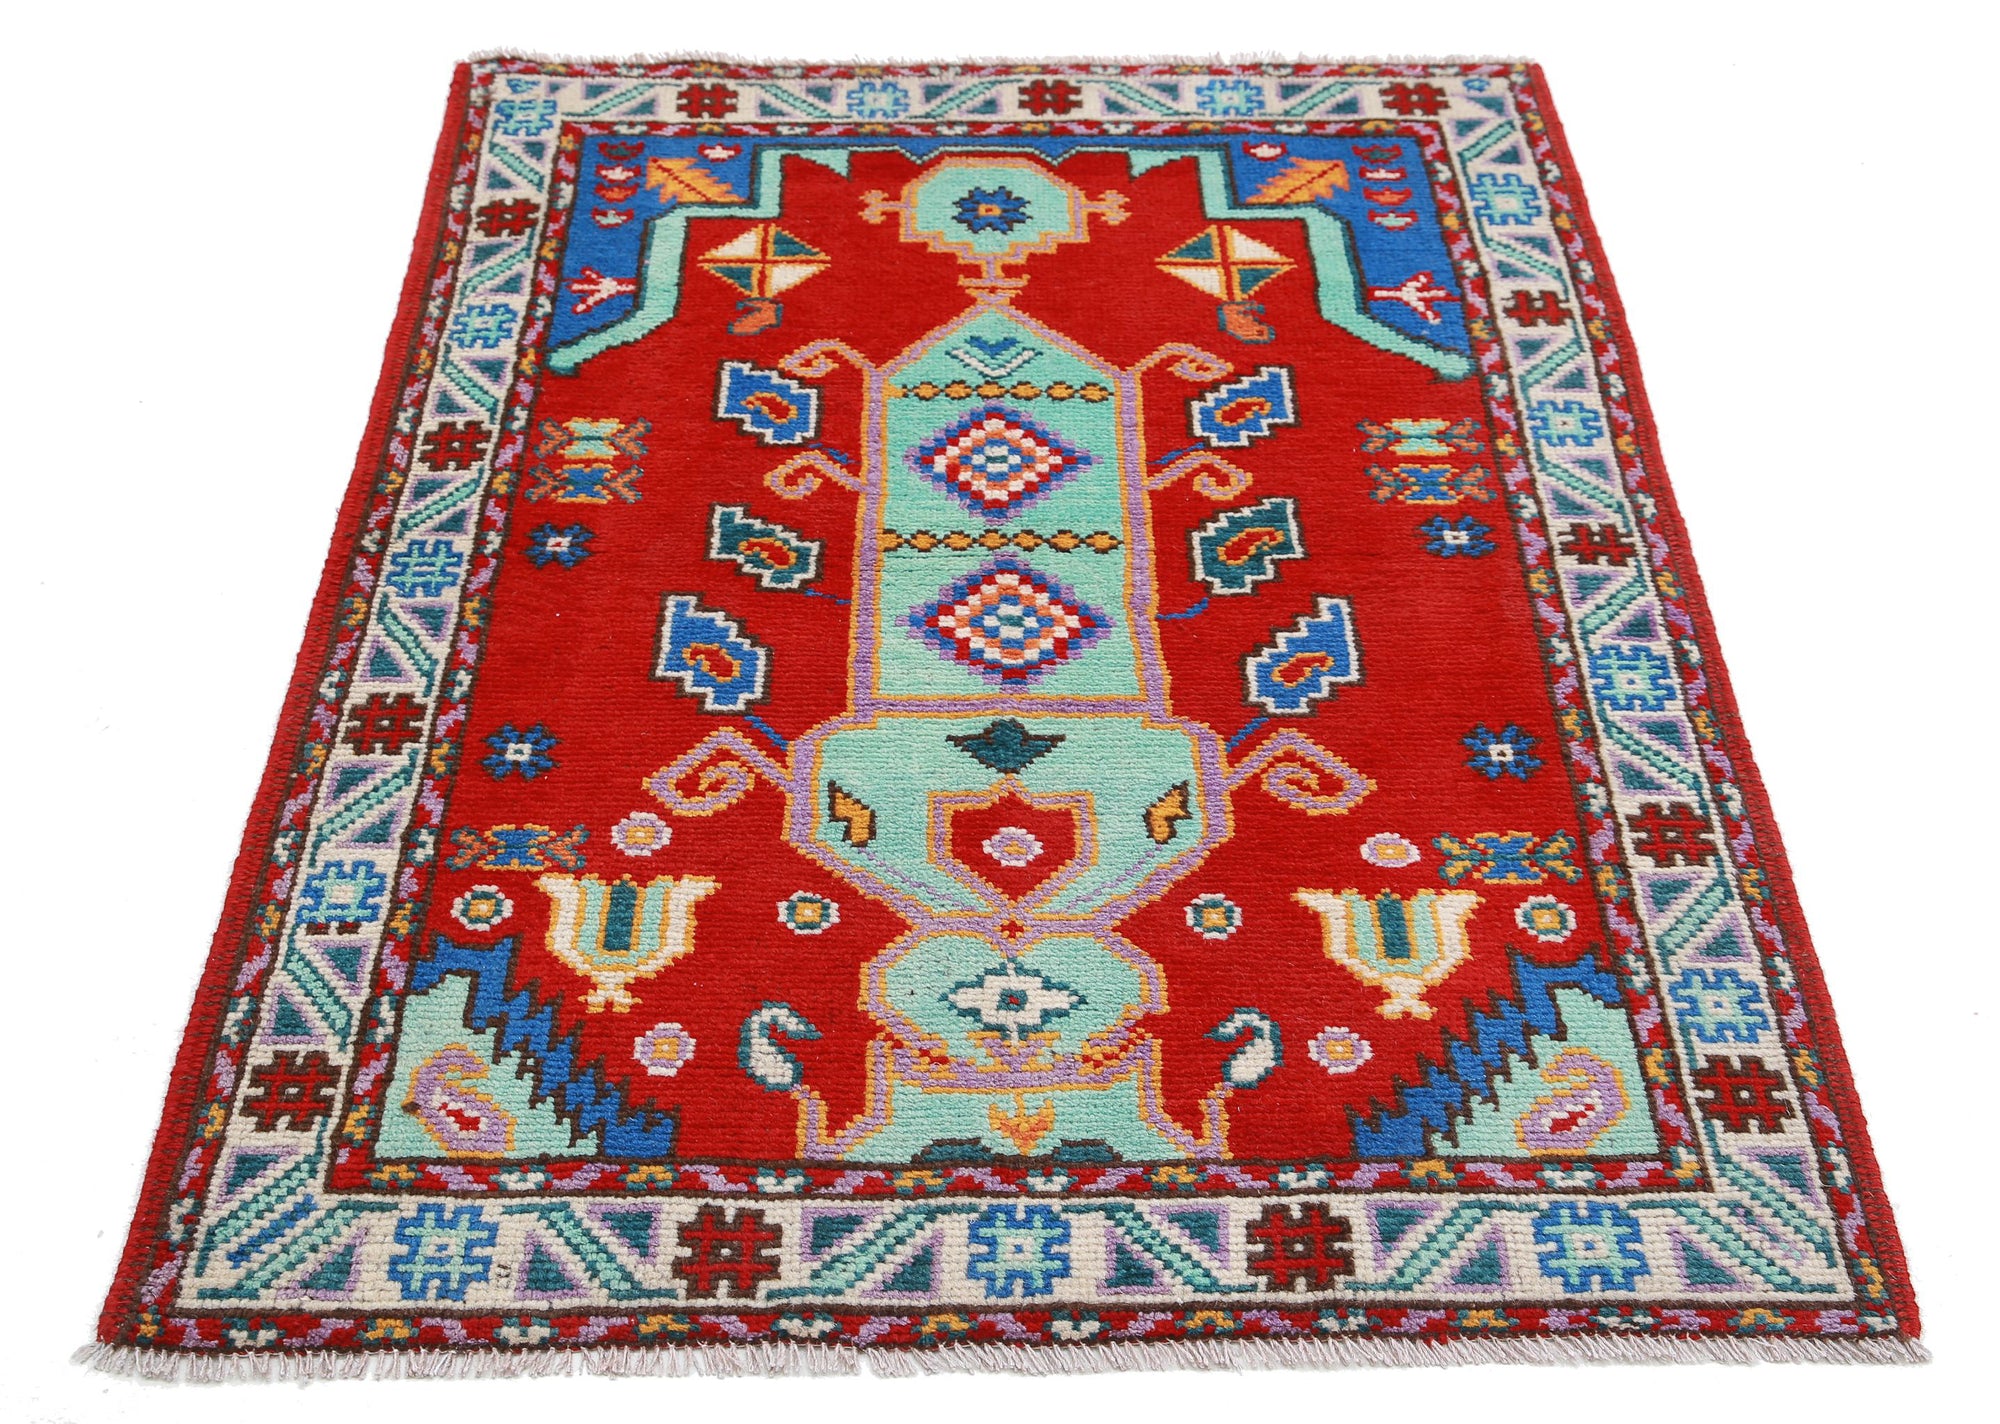 Revival-hand-knotted-qarghani-wool-rug-5014200-3.jpg